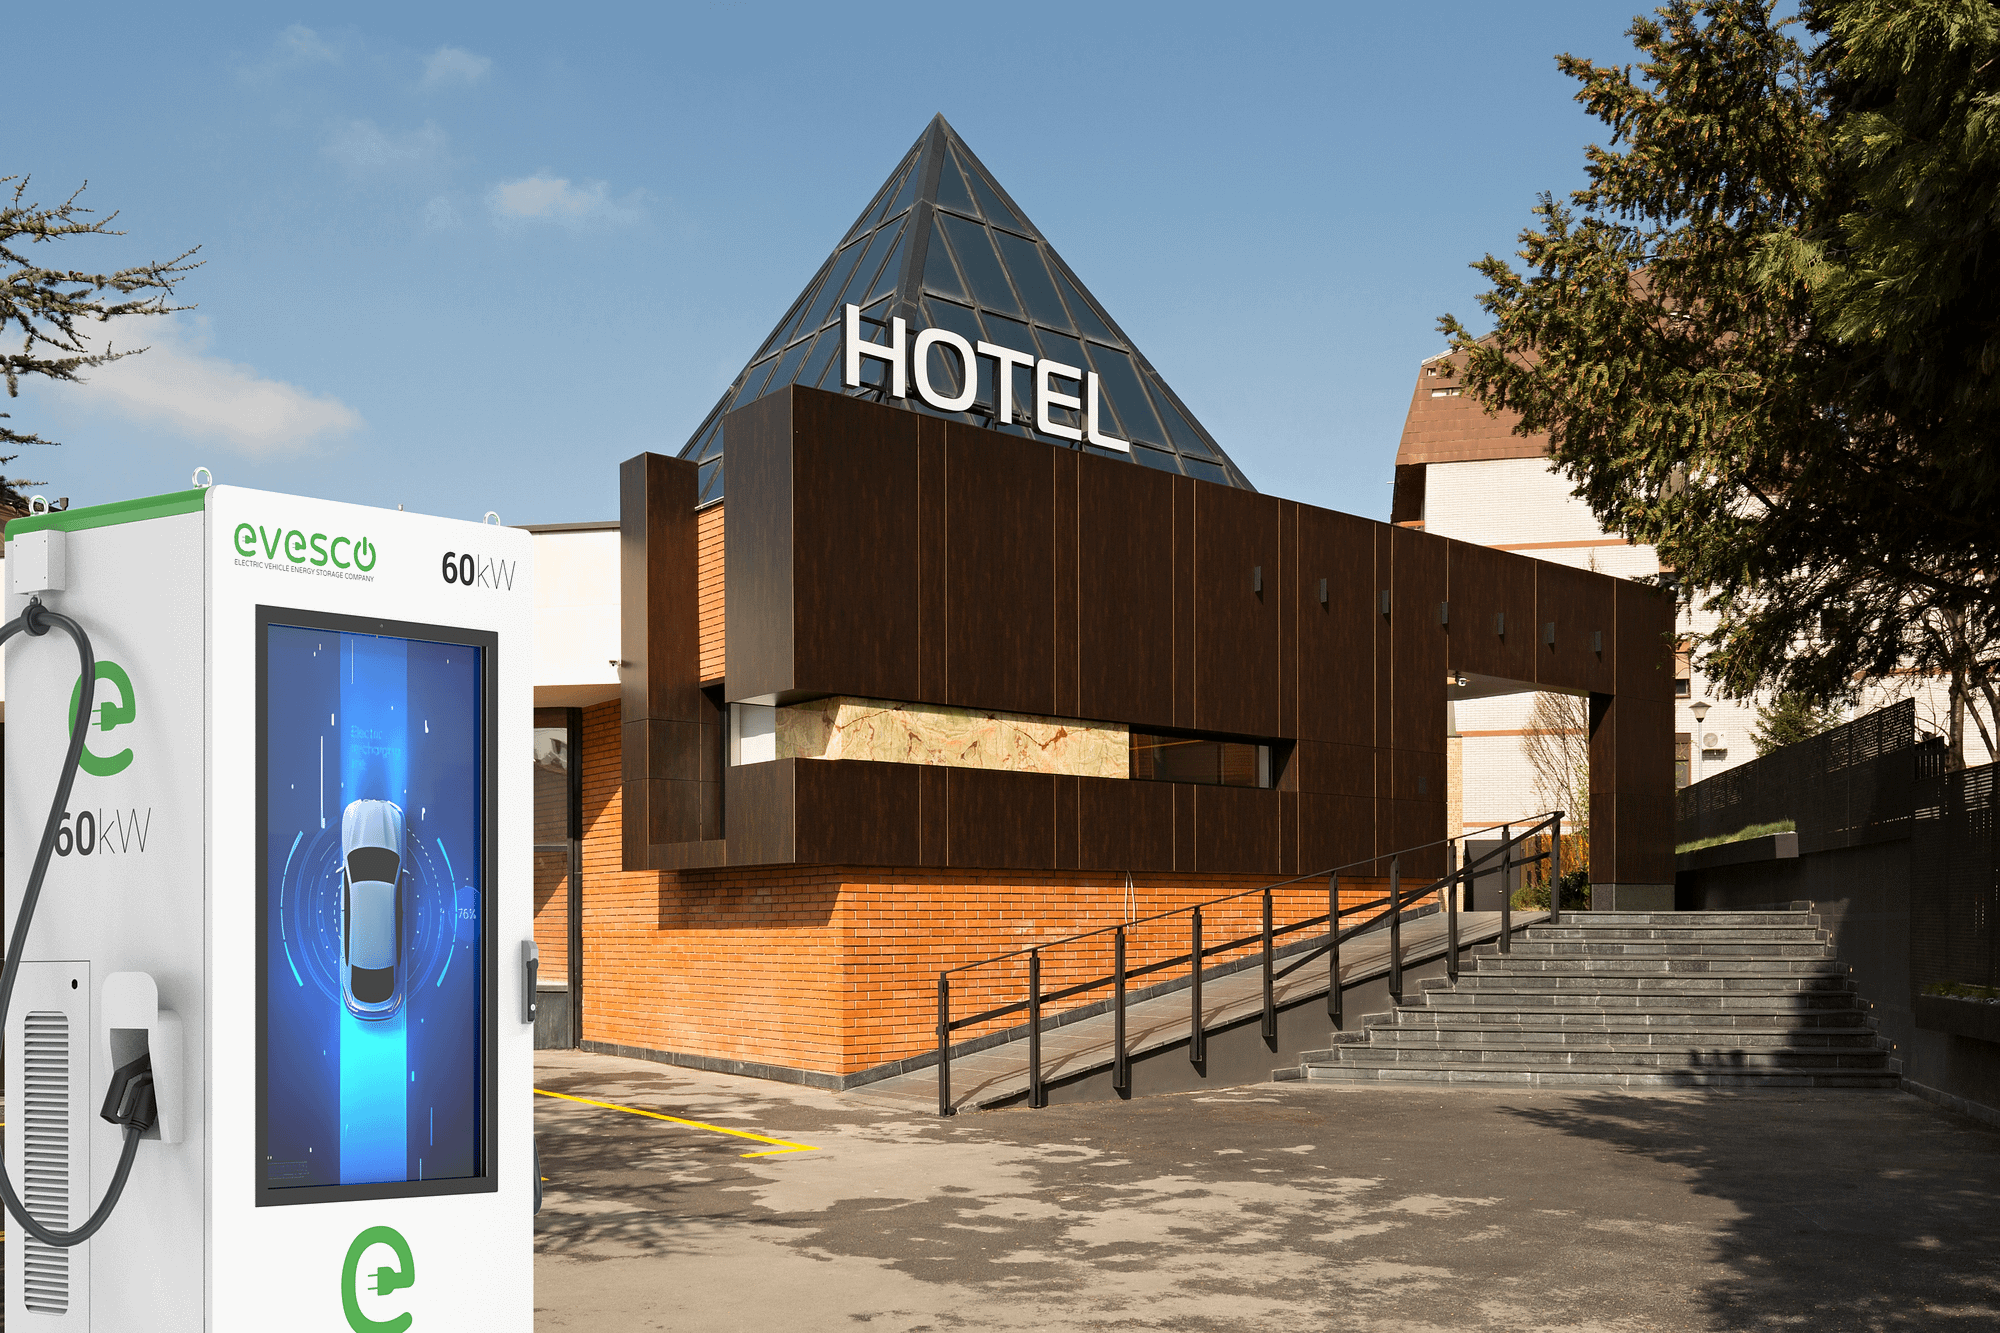 The Benefits of Offering EV Charging at Hotels